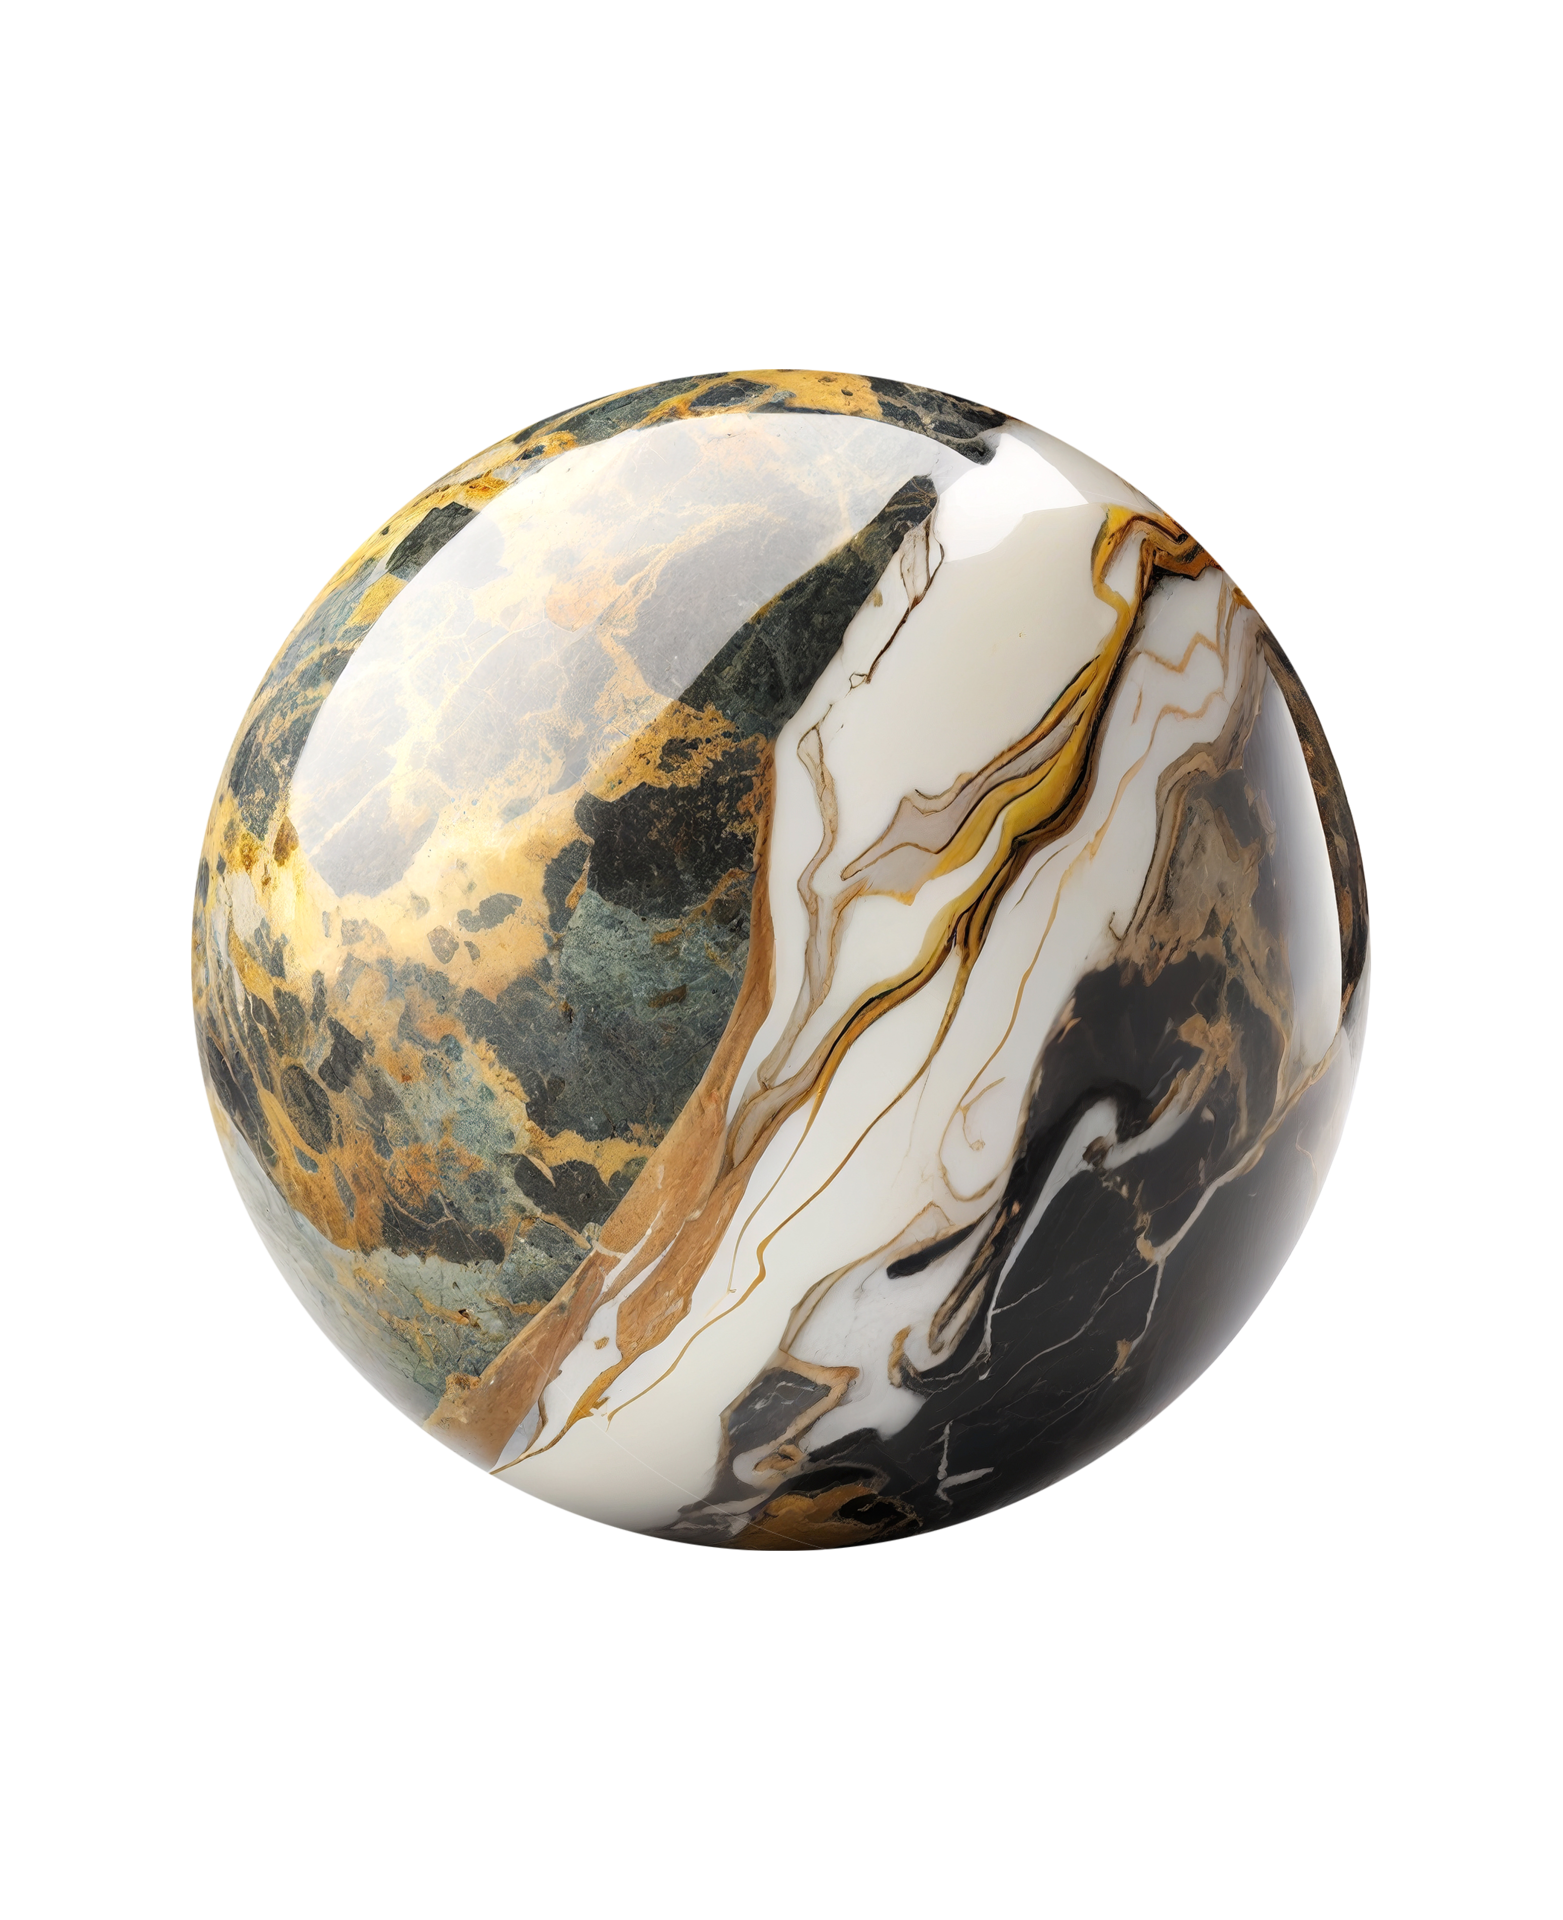 Sculptural Marble Decorative Objects, Set of 2 | AnthroLiving